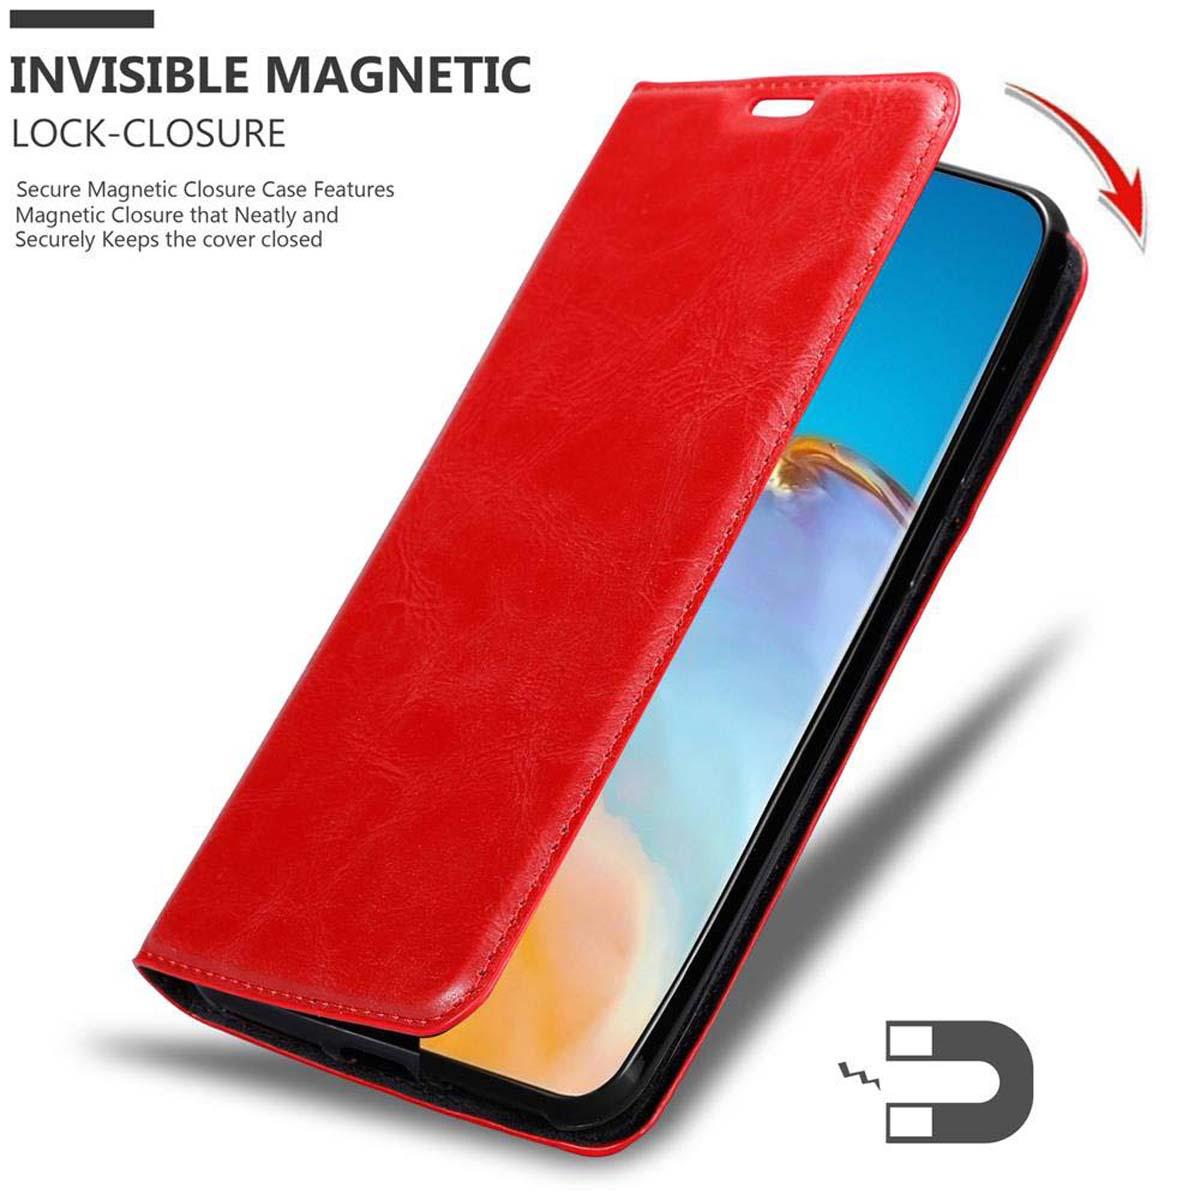 P40 ROT Book Magnet, APFEL P40 PRO+, / Huawei, Hülle Invisible PRO Bookcover, CADORABO